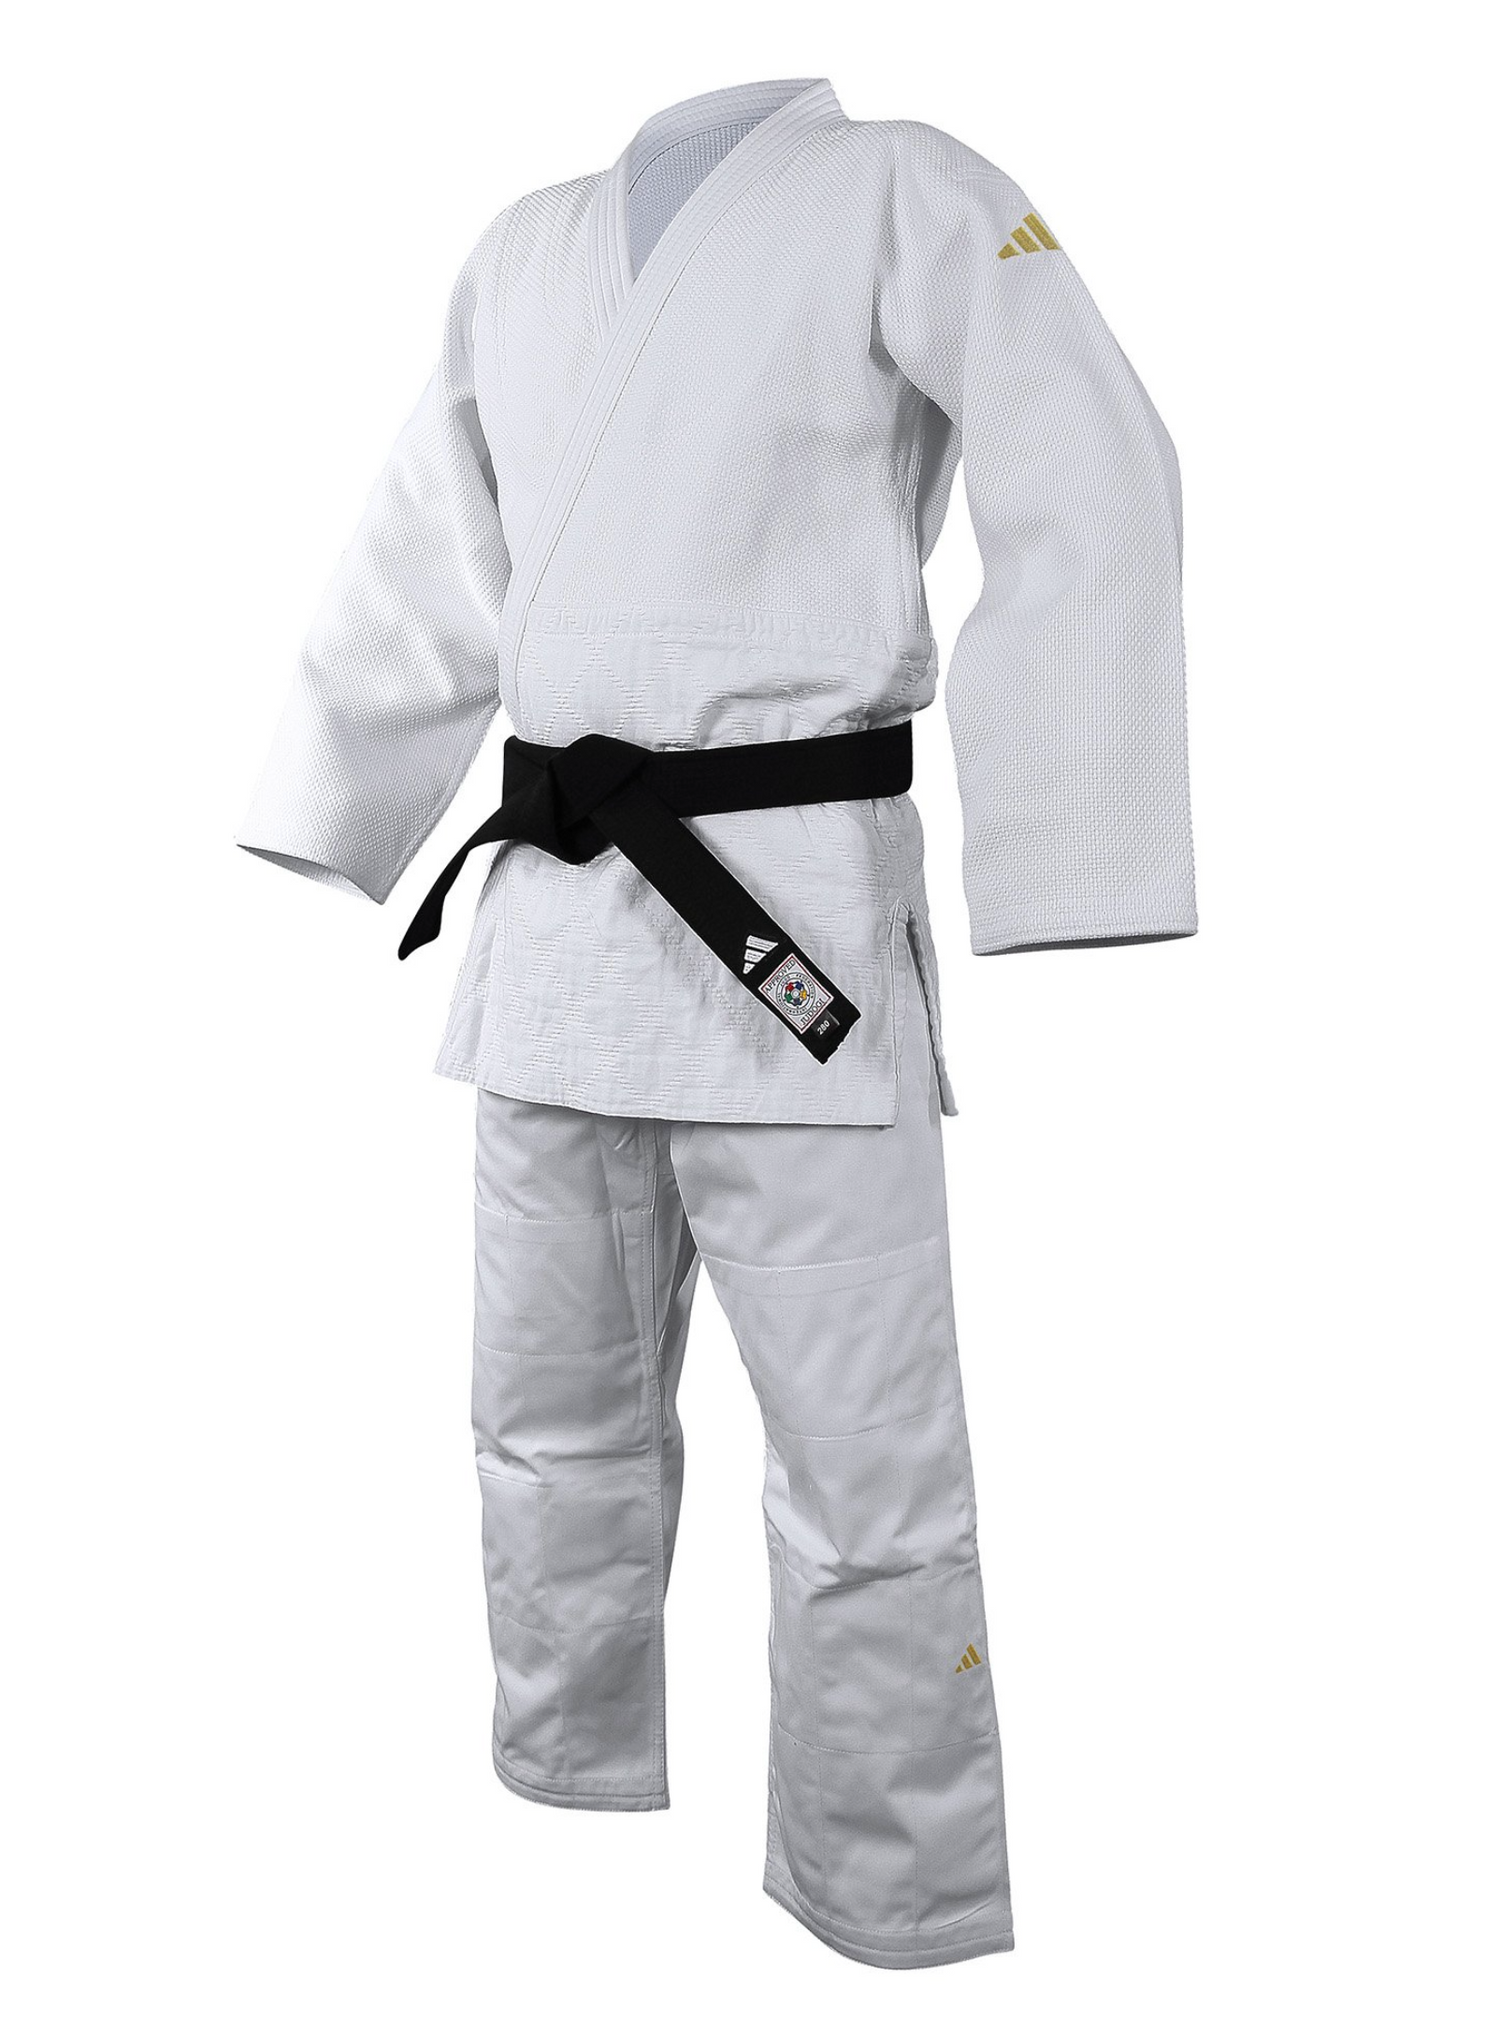 Adidas IJF Champion 3 Slim Fit White for 2023 with Gold Logo